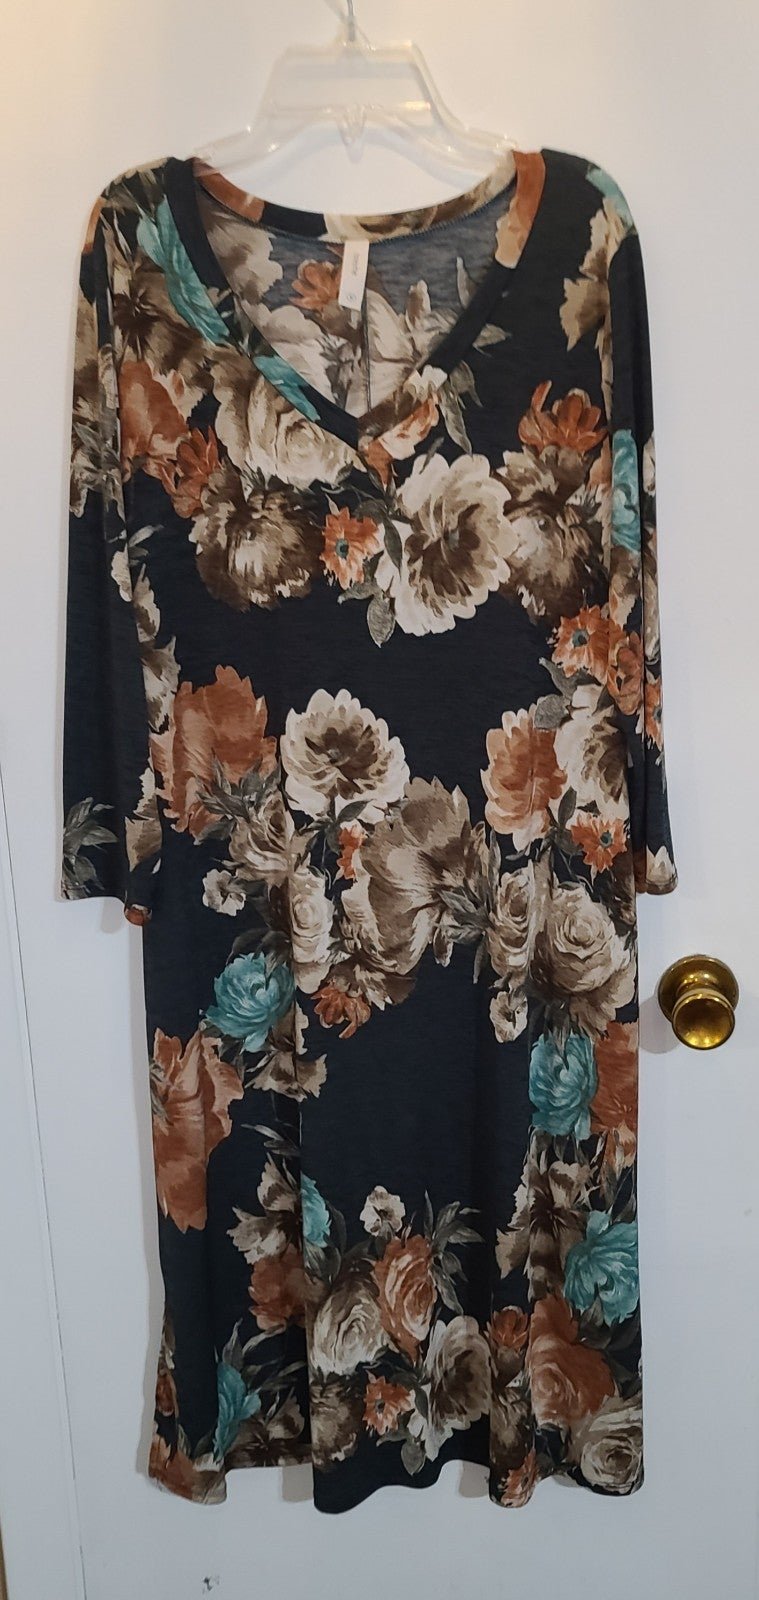 Wholesale price #148 NWOT Floral Dress with pockets p2c